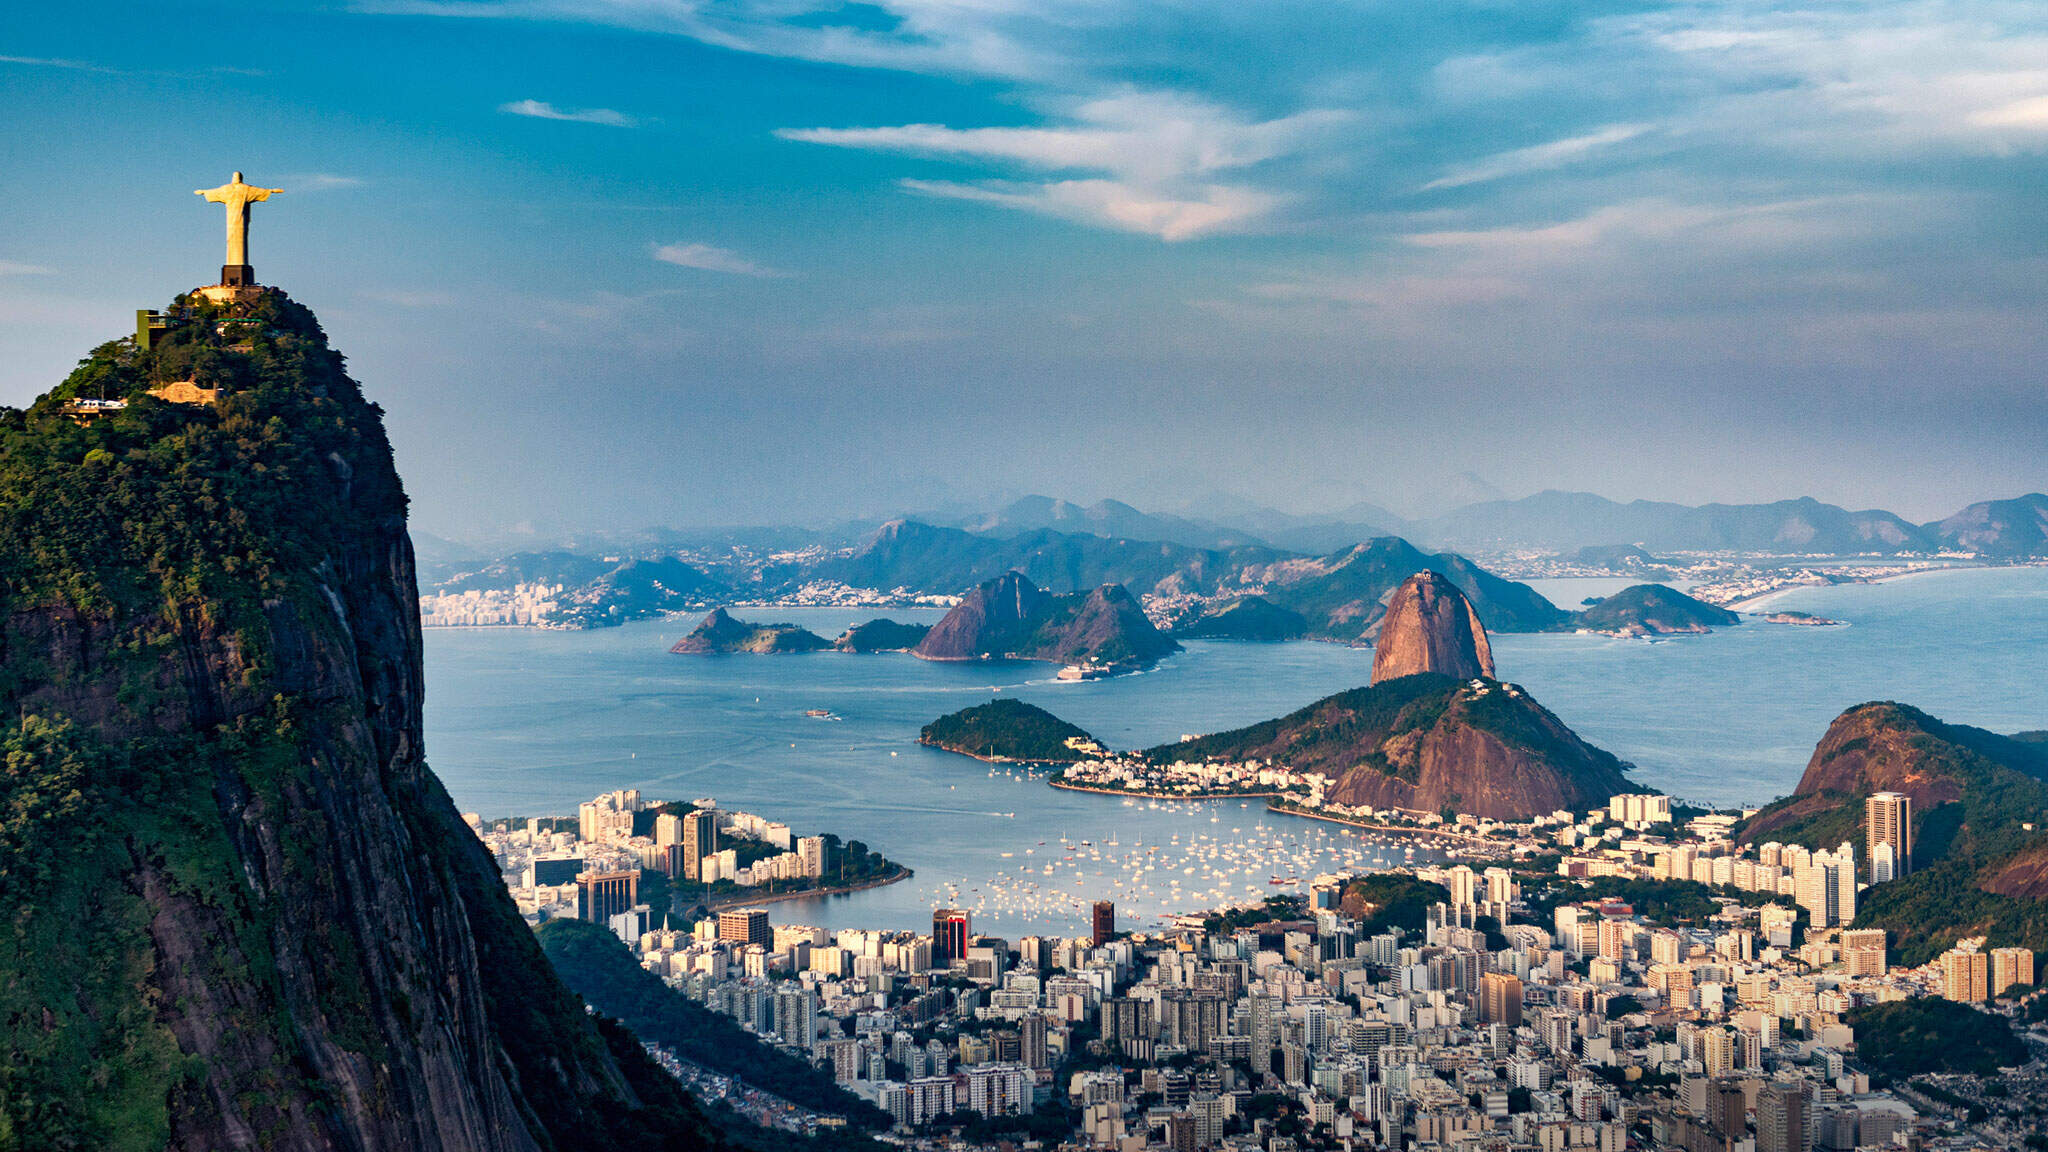 The legendary statue of Christ the Redeemer watches over Rio de Janeiro from the top of Corcovado hill